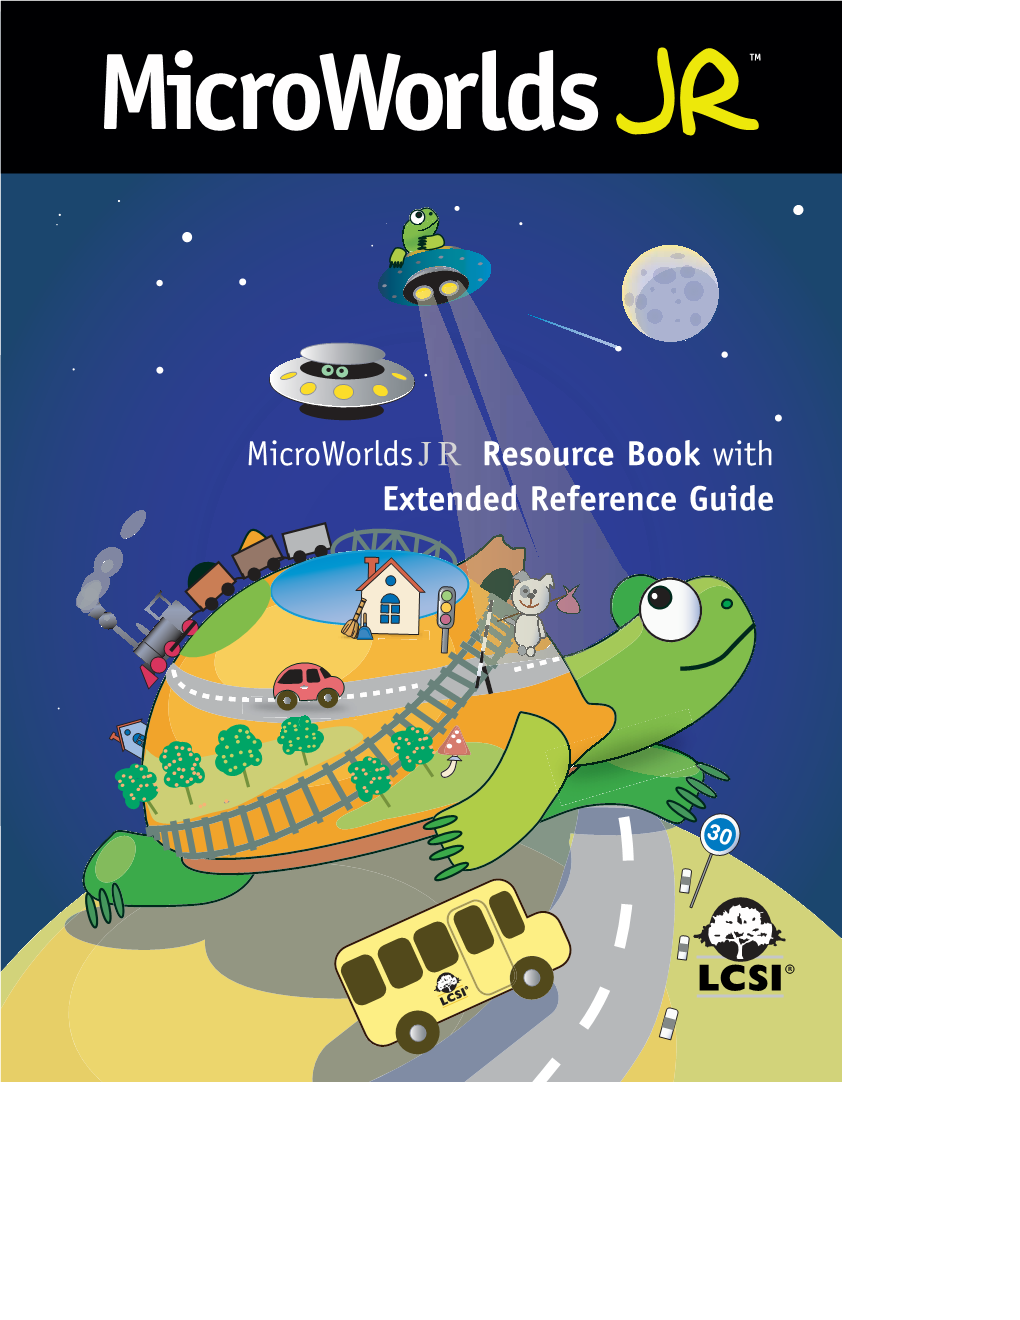 Microworldsjr Resource Book with Extended Reference Guide